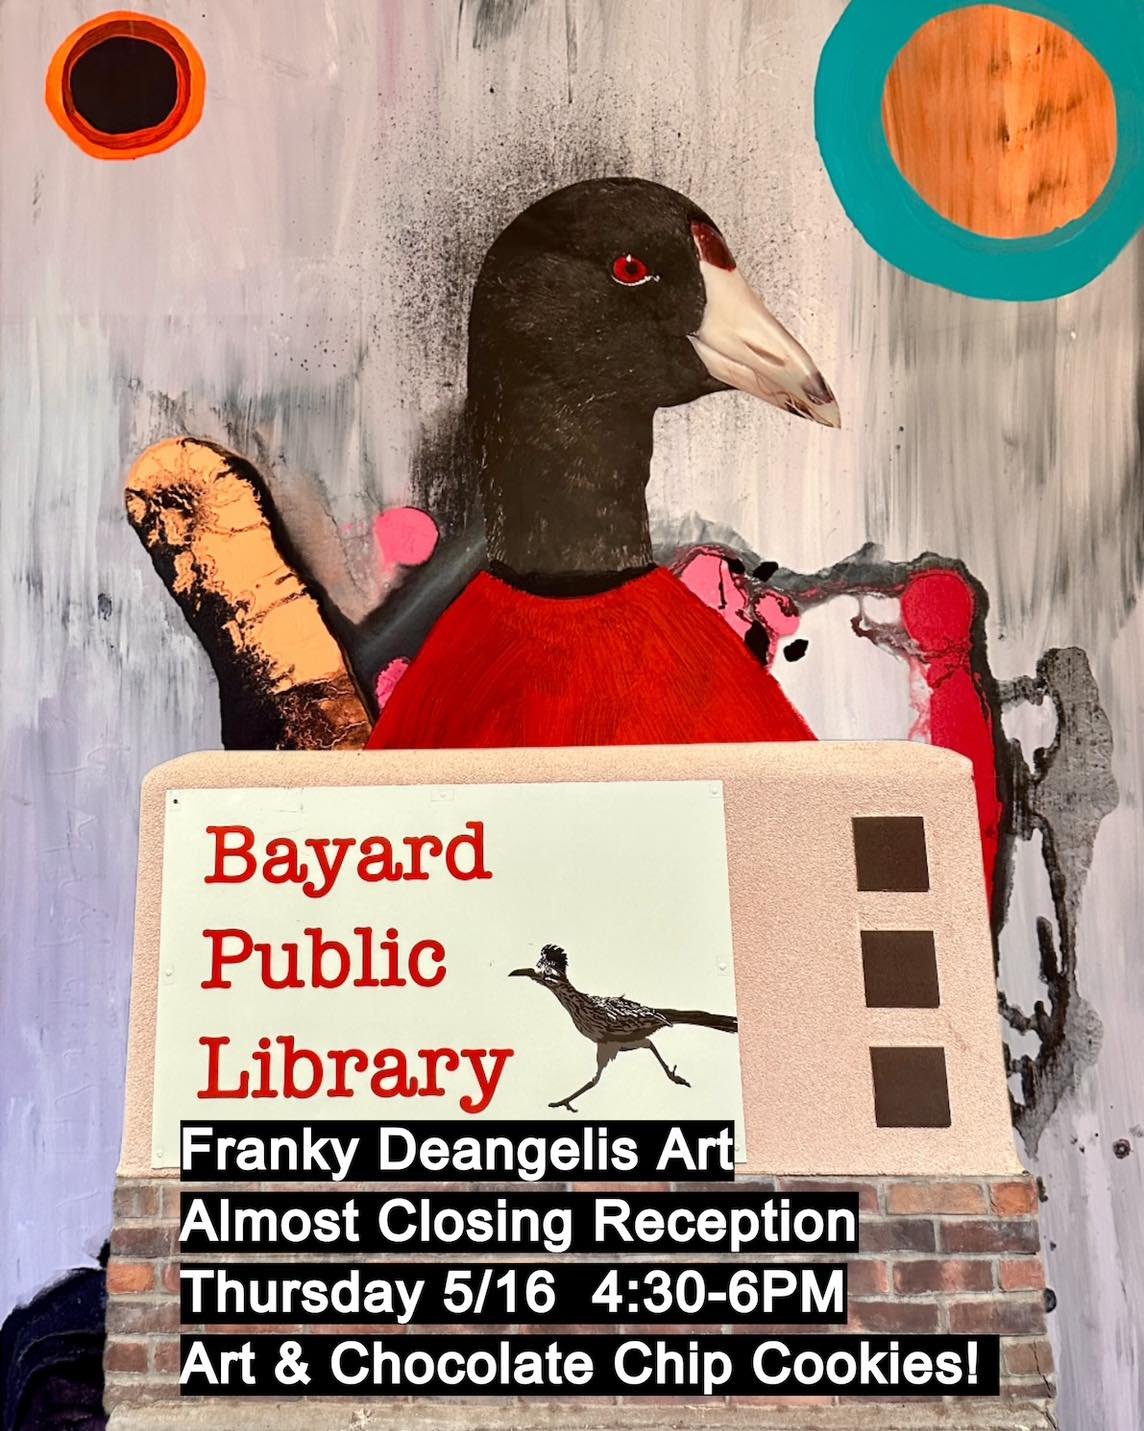 The &quot;Almost Closing&quot; Reception for Franky DeAngelis' art show, CHAOS, is Thursday, May 16 from 4:30-6pm at the Bayard Public Library, 1112 Central Ave, Bayard, NM. CHAOS runs through the end of May. Regular Library hours are M-F, 9:30-5:30 